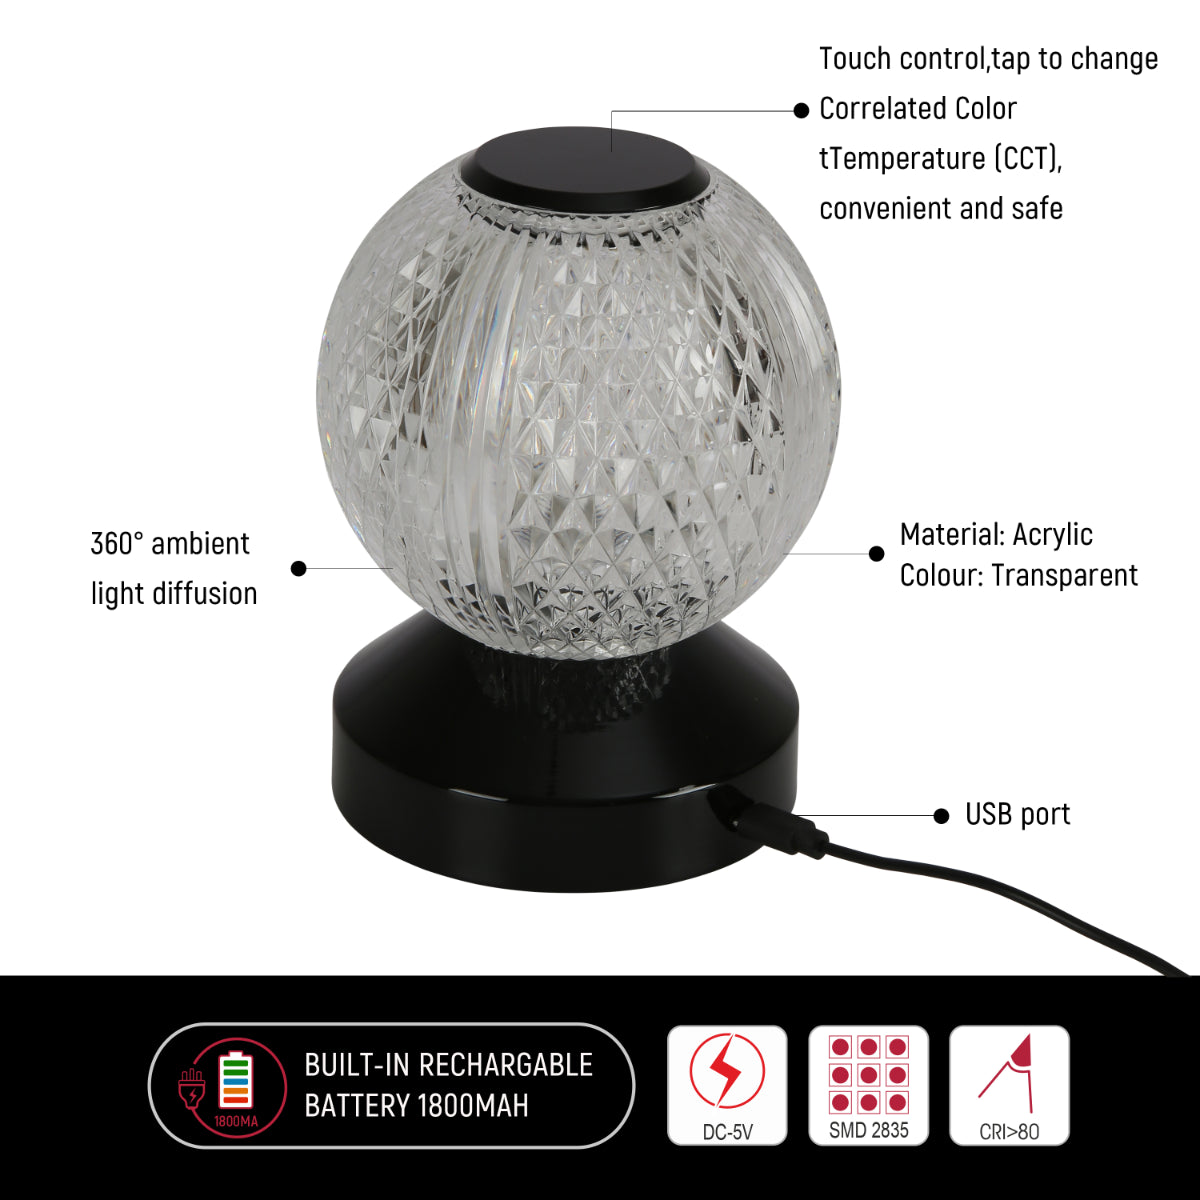 Technical specs of Illumina Sphere Touch: Rechargeable Spherical LED Lamp 130-03726